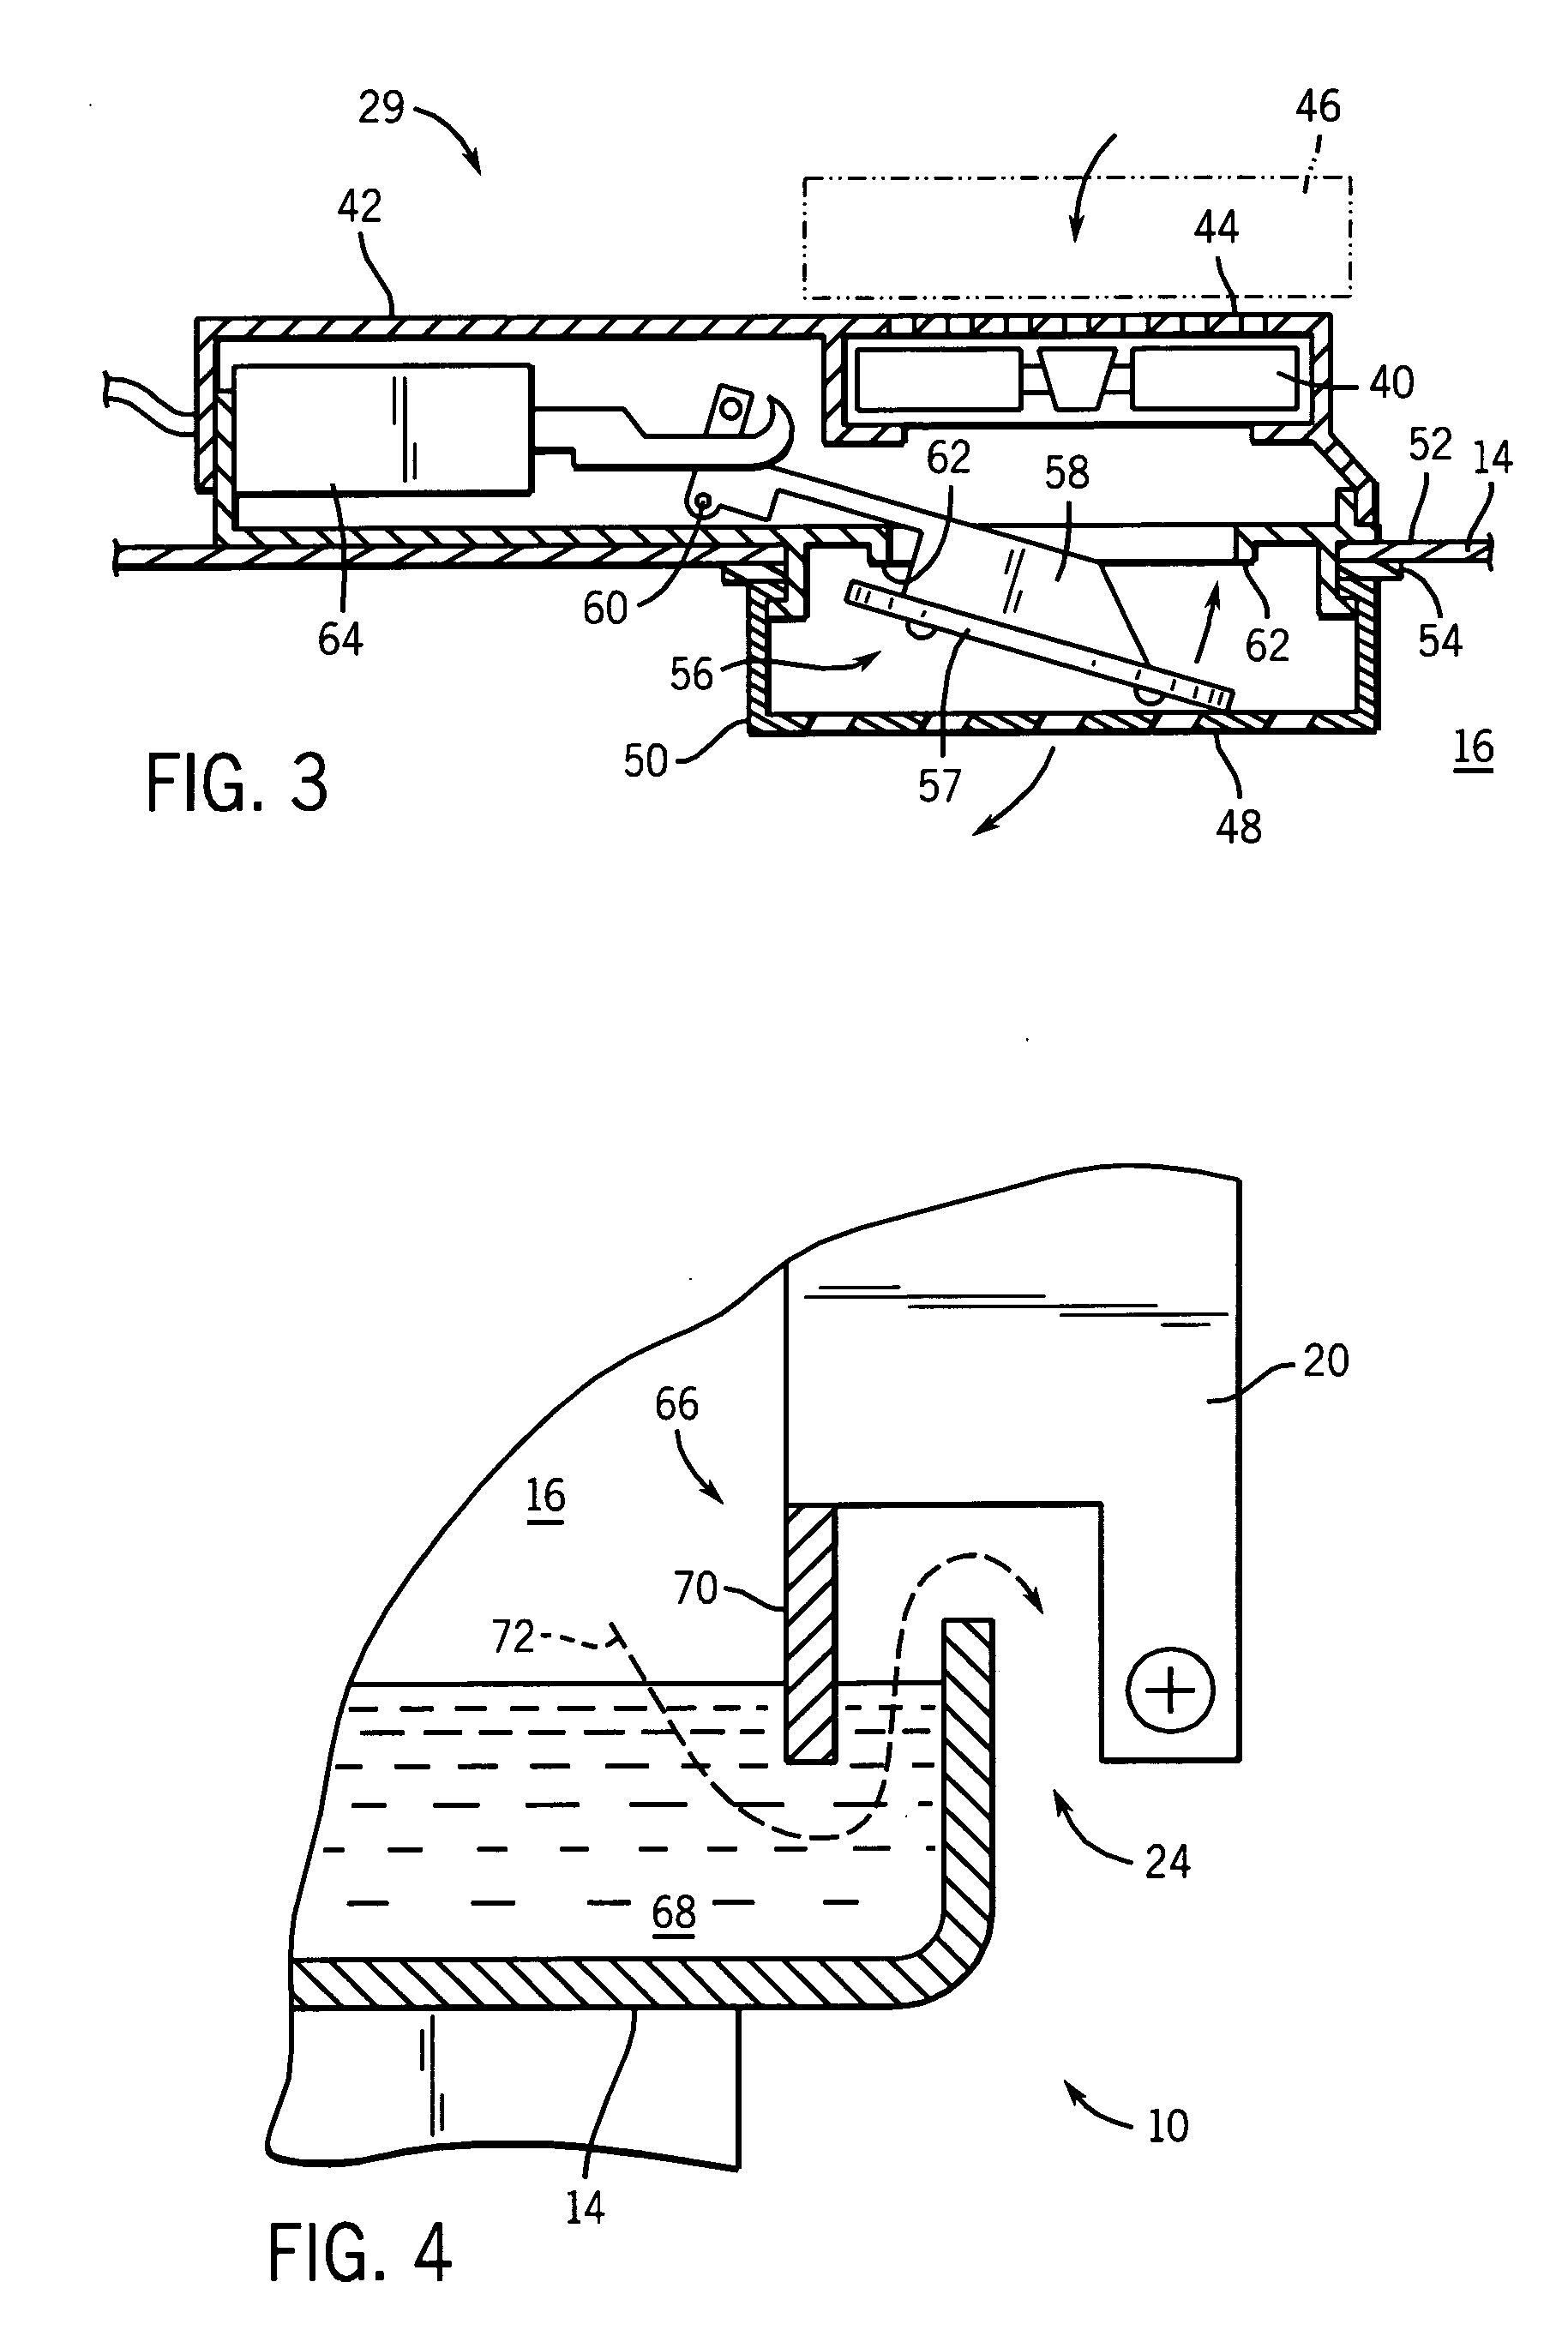 Dishwasher with counter-convection air flow